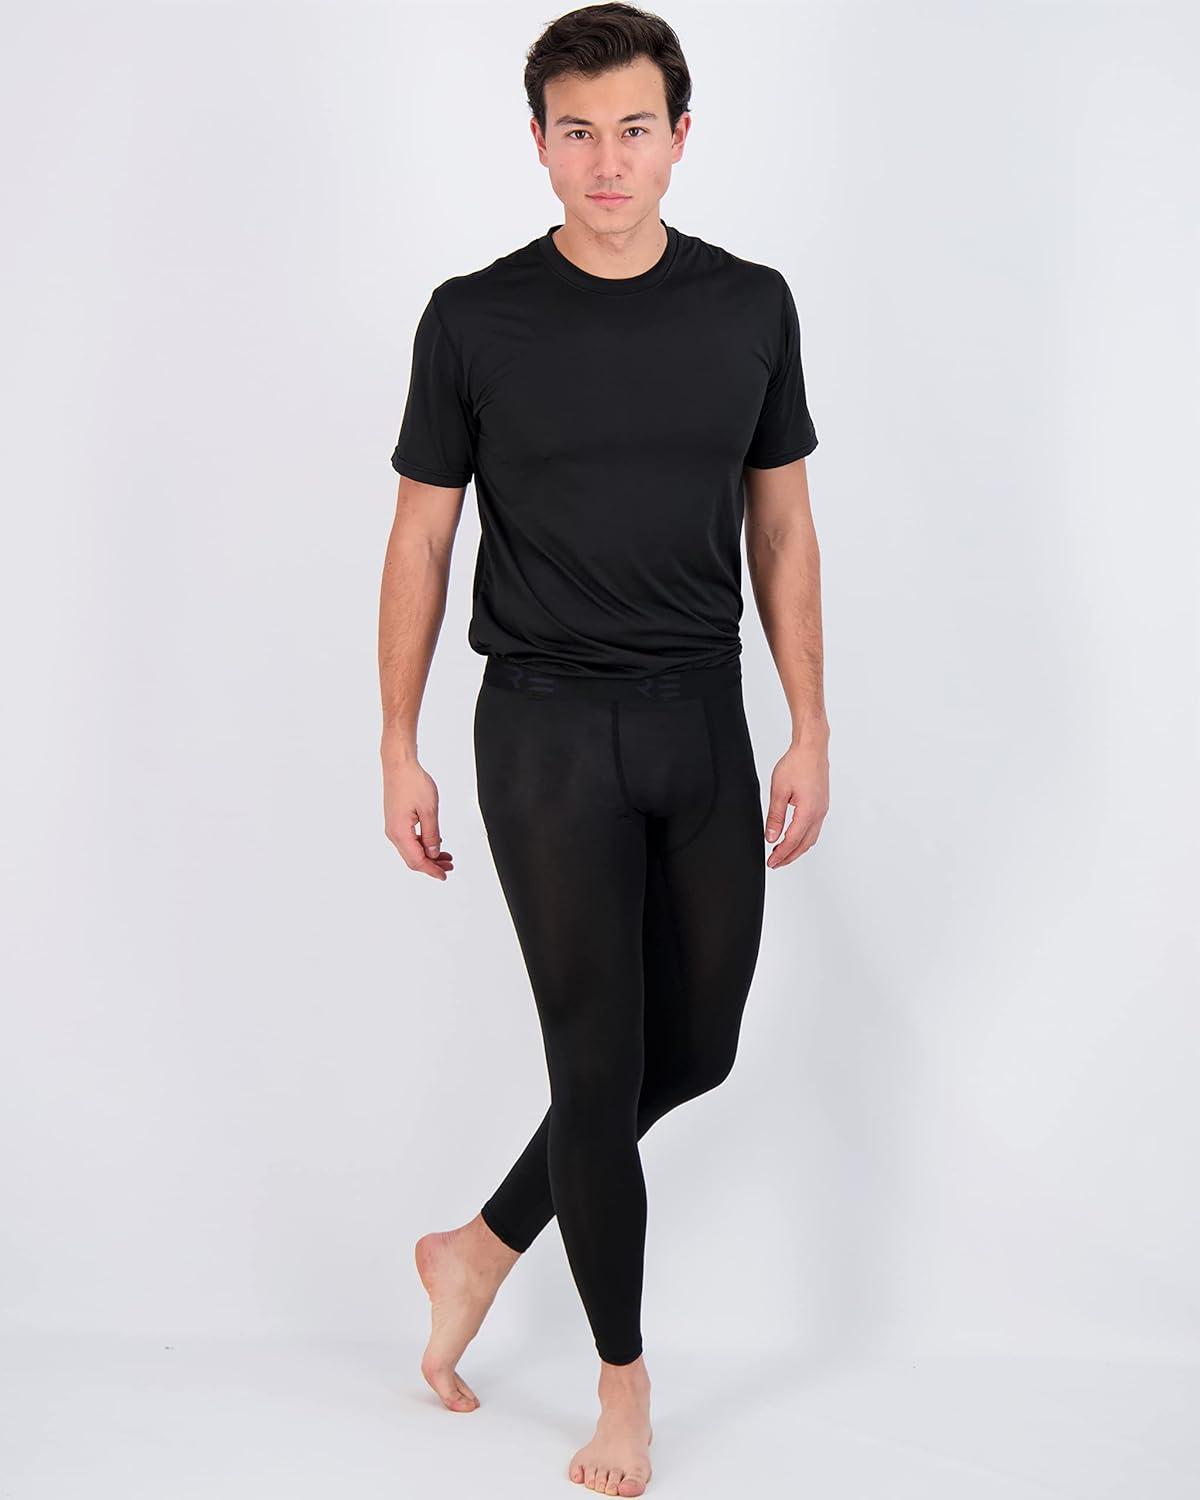 Real Essentials 3 Pack: Men's Active Compression Pants - Workout Base Layer  Tights Leggings